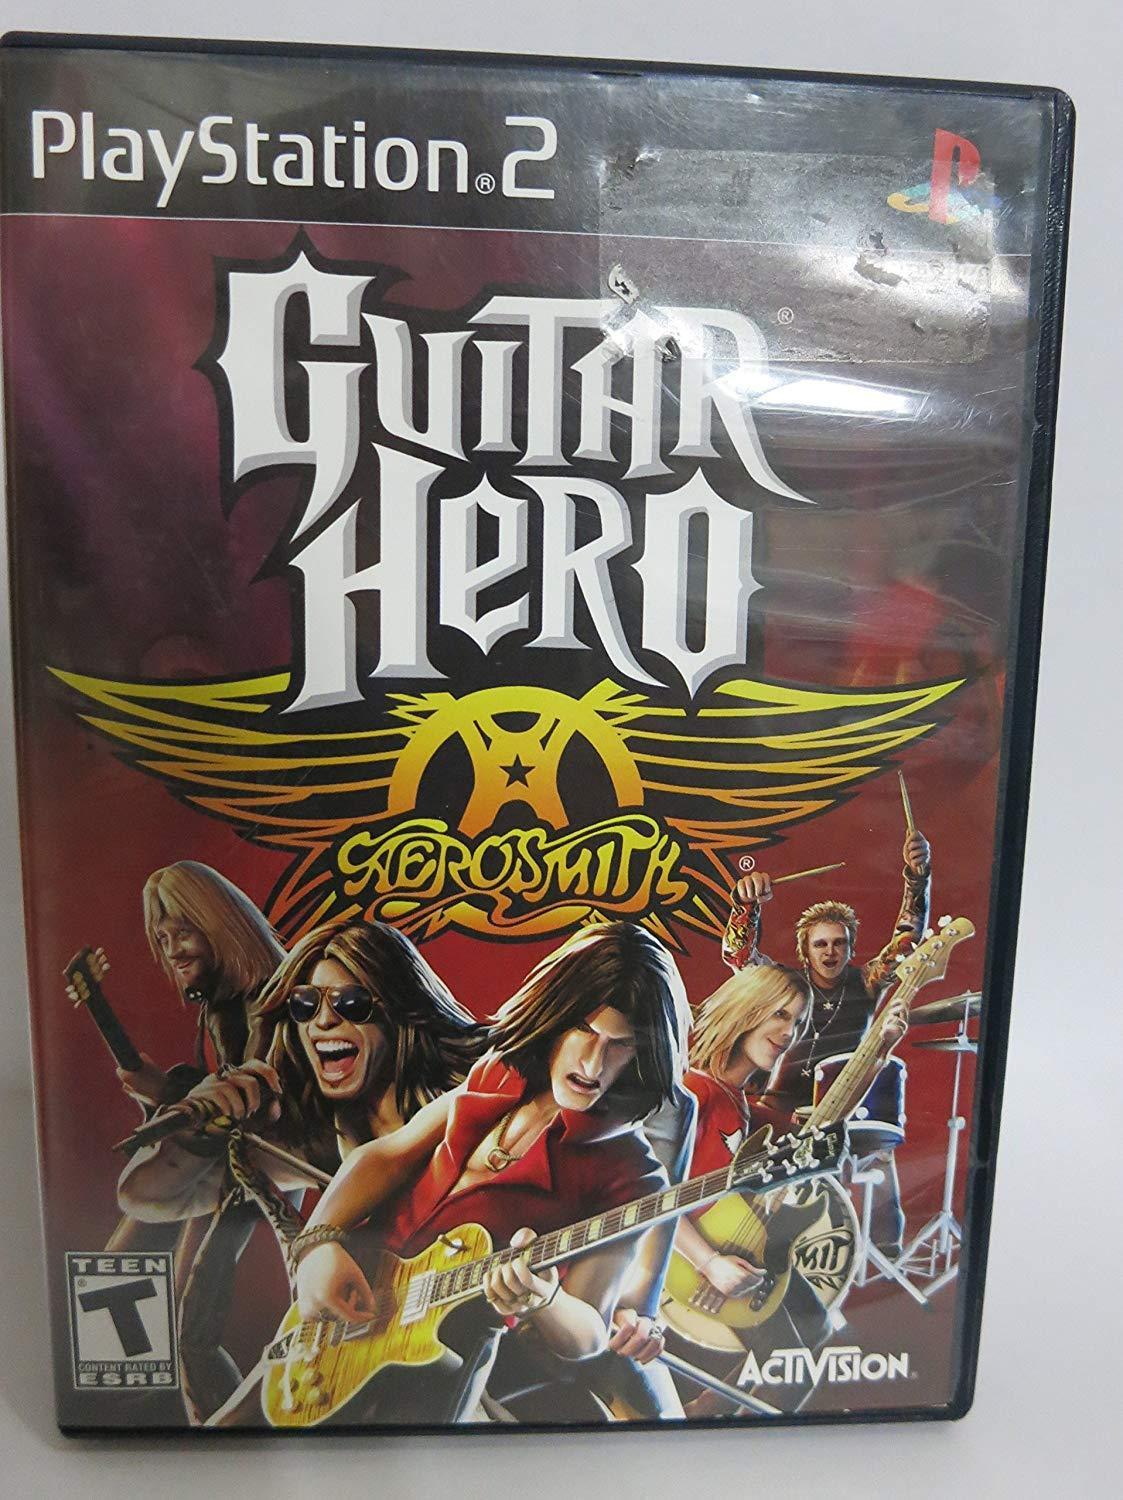  Guitar Hero - Aerosmith - PlayStation 2 (Game only) :  Activision Inc: Video Games